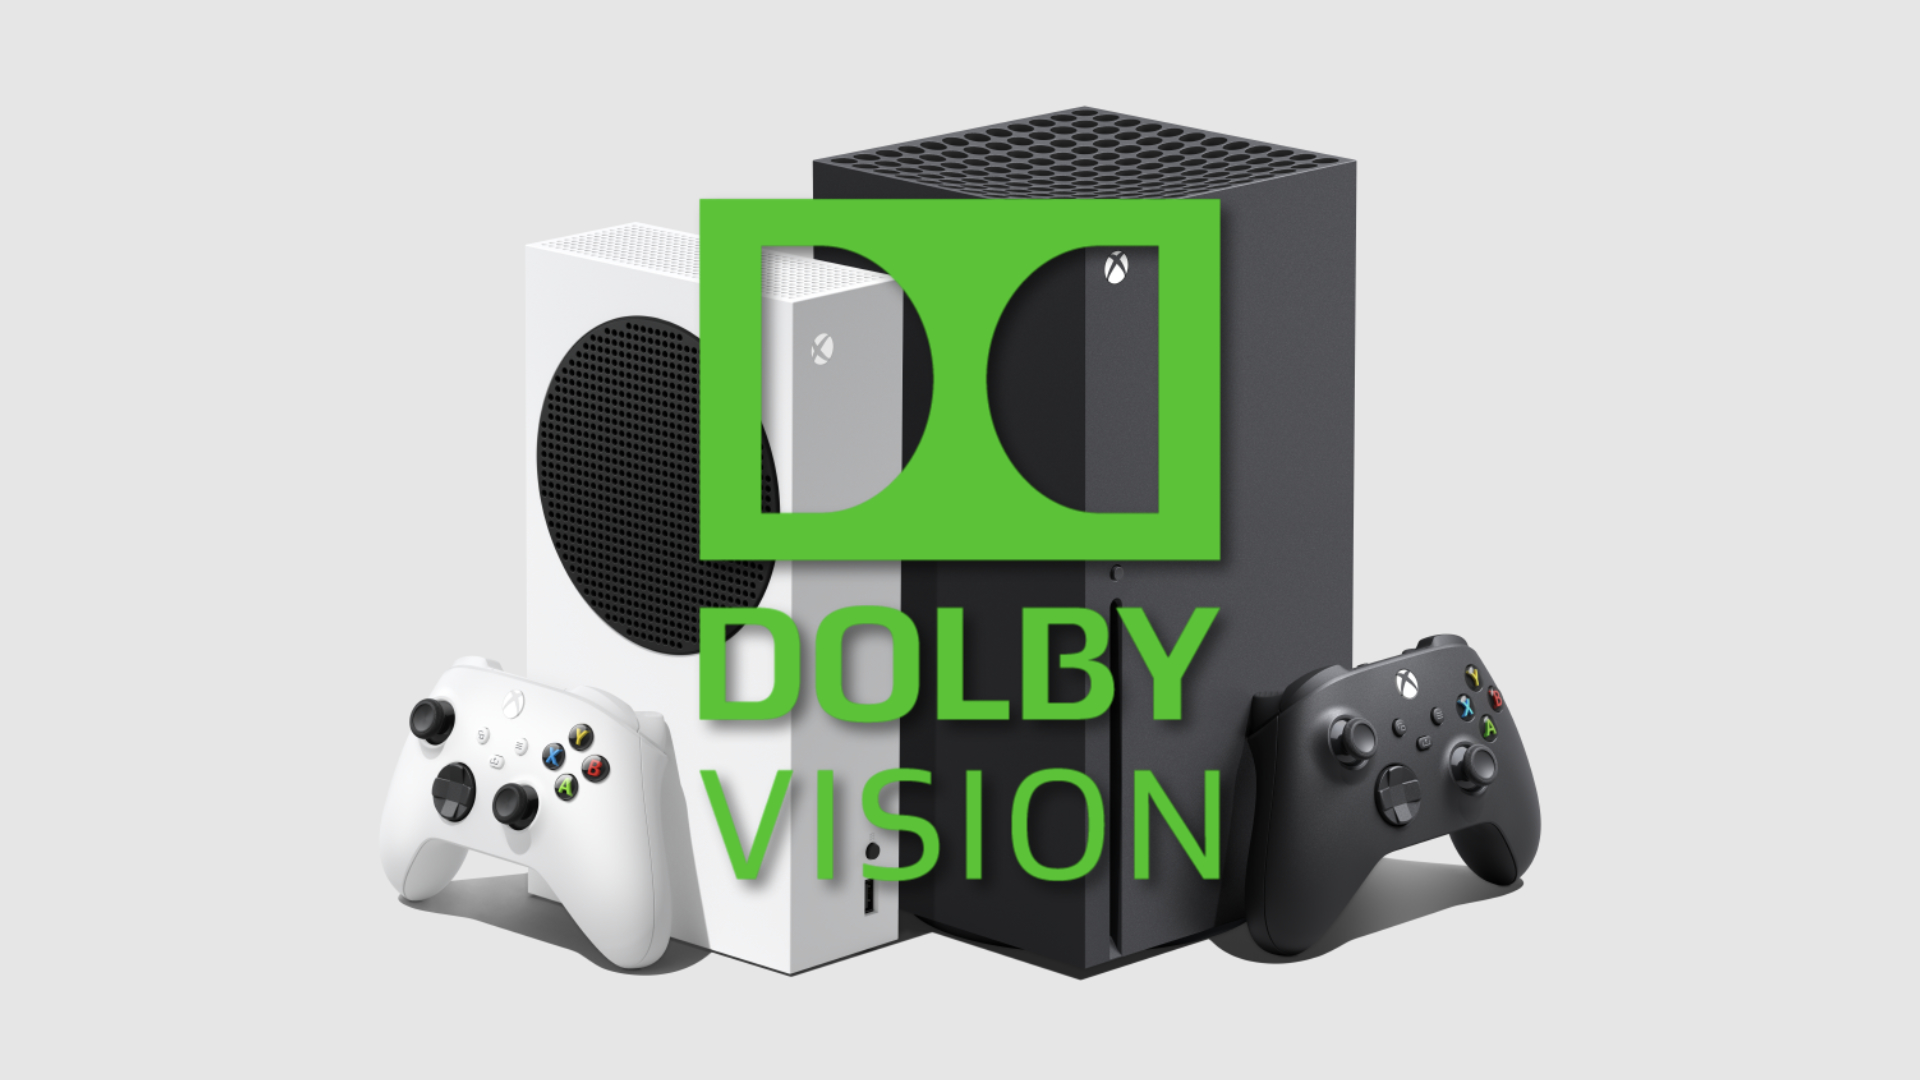 xbox series x dolby vision